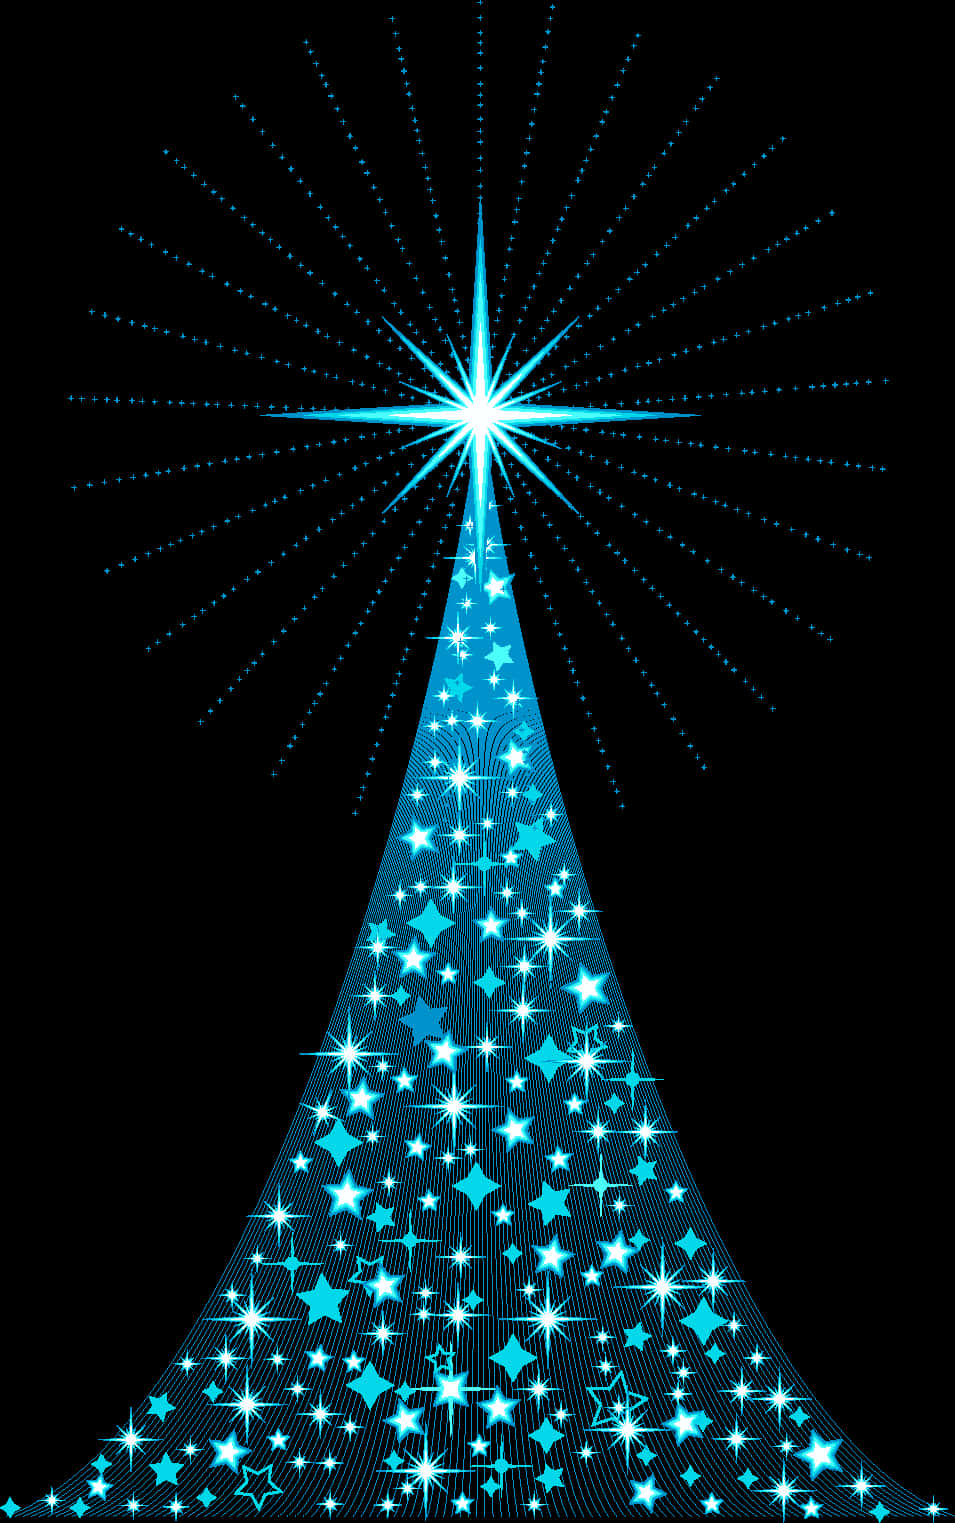 A Blue Christmas Tree With A Star